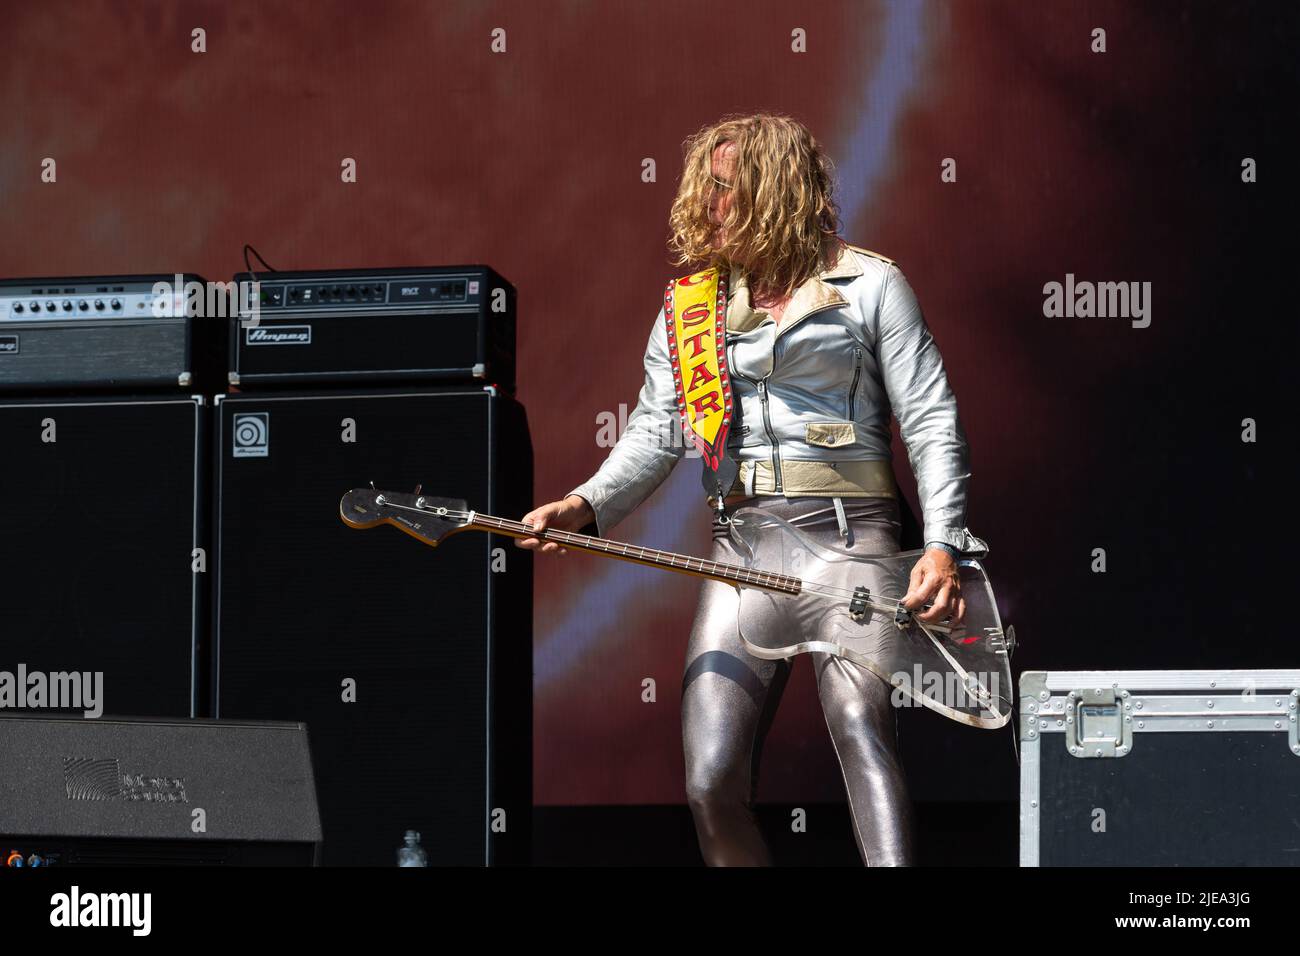 Oslo, Norway. 24th, June 2022. The Danish rock band D-A-D performs a live concert during the Norwegian music festival Tons of Rock 2022 in Oslo. Here bass player Stig Pedersen is seen live on stage. (Photo credit: Gonzales Photo - Per-Otto Oppi). Stock Photo